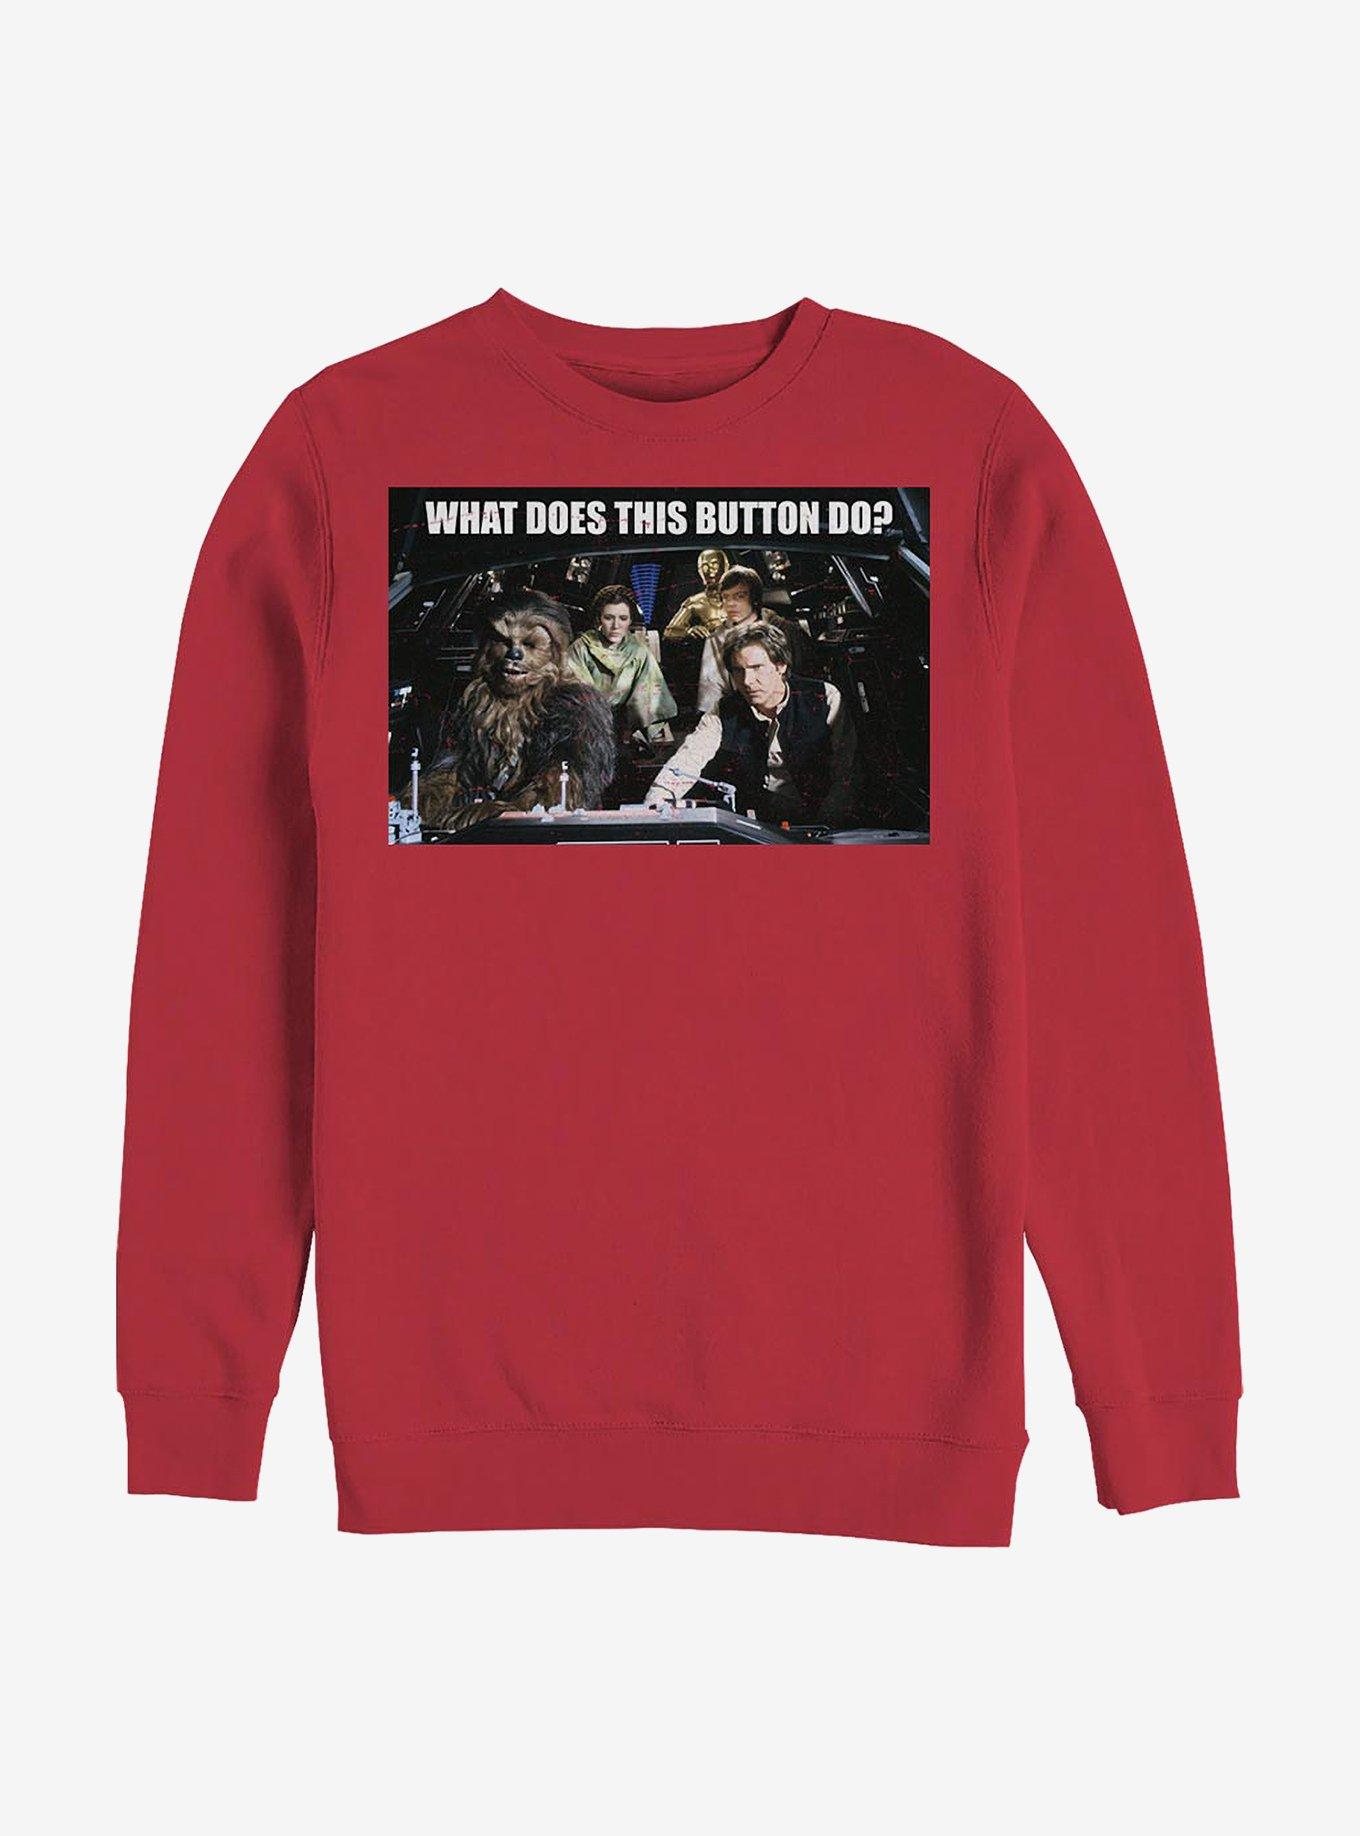 Star Wars Falcon What Does This Button Do? Crew Sweatshirt